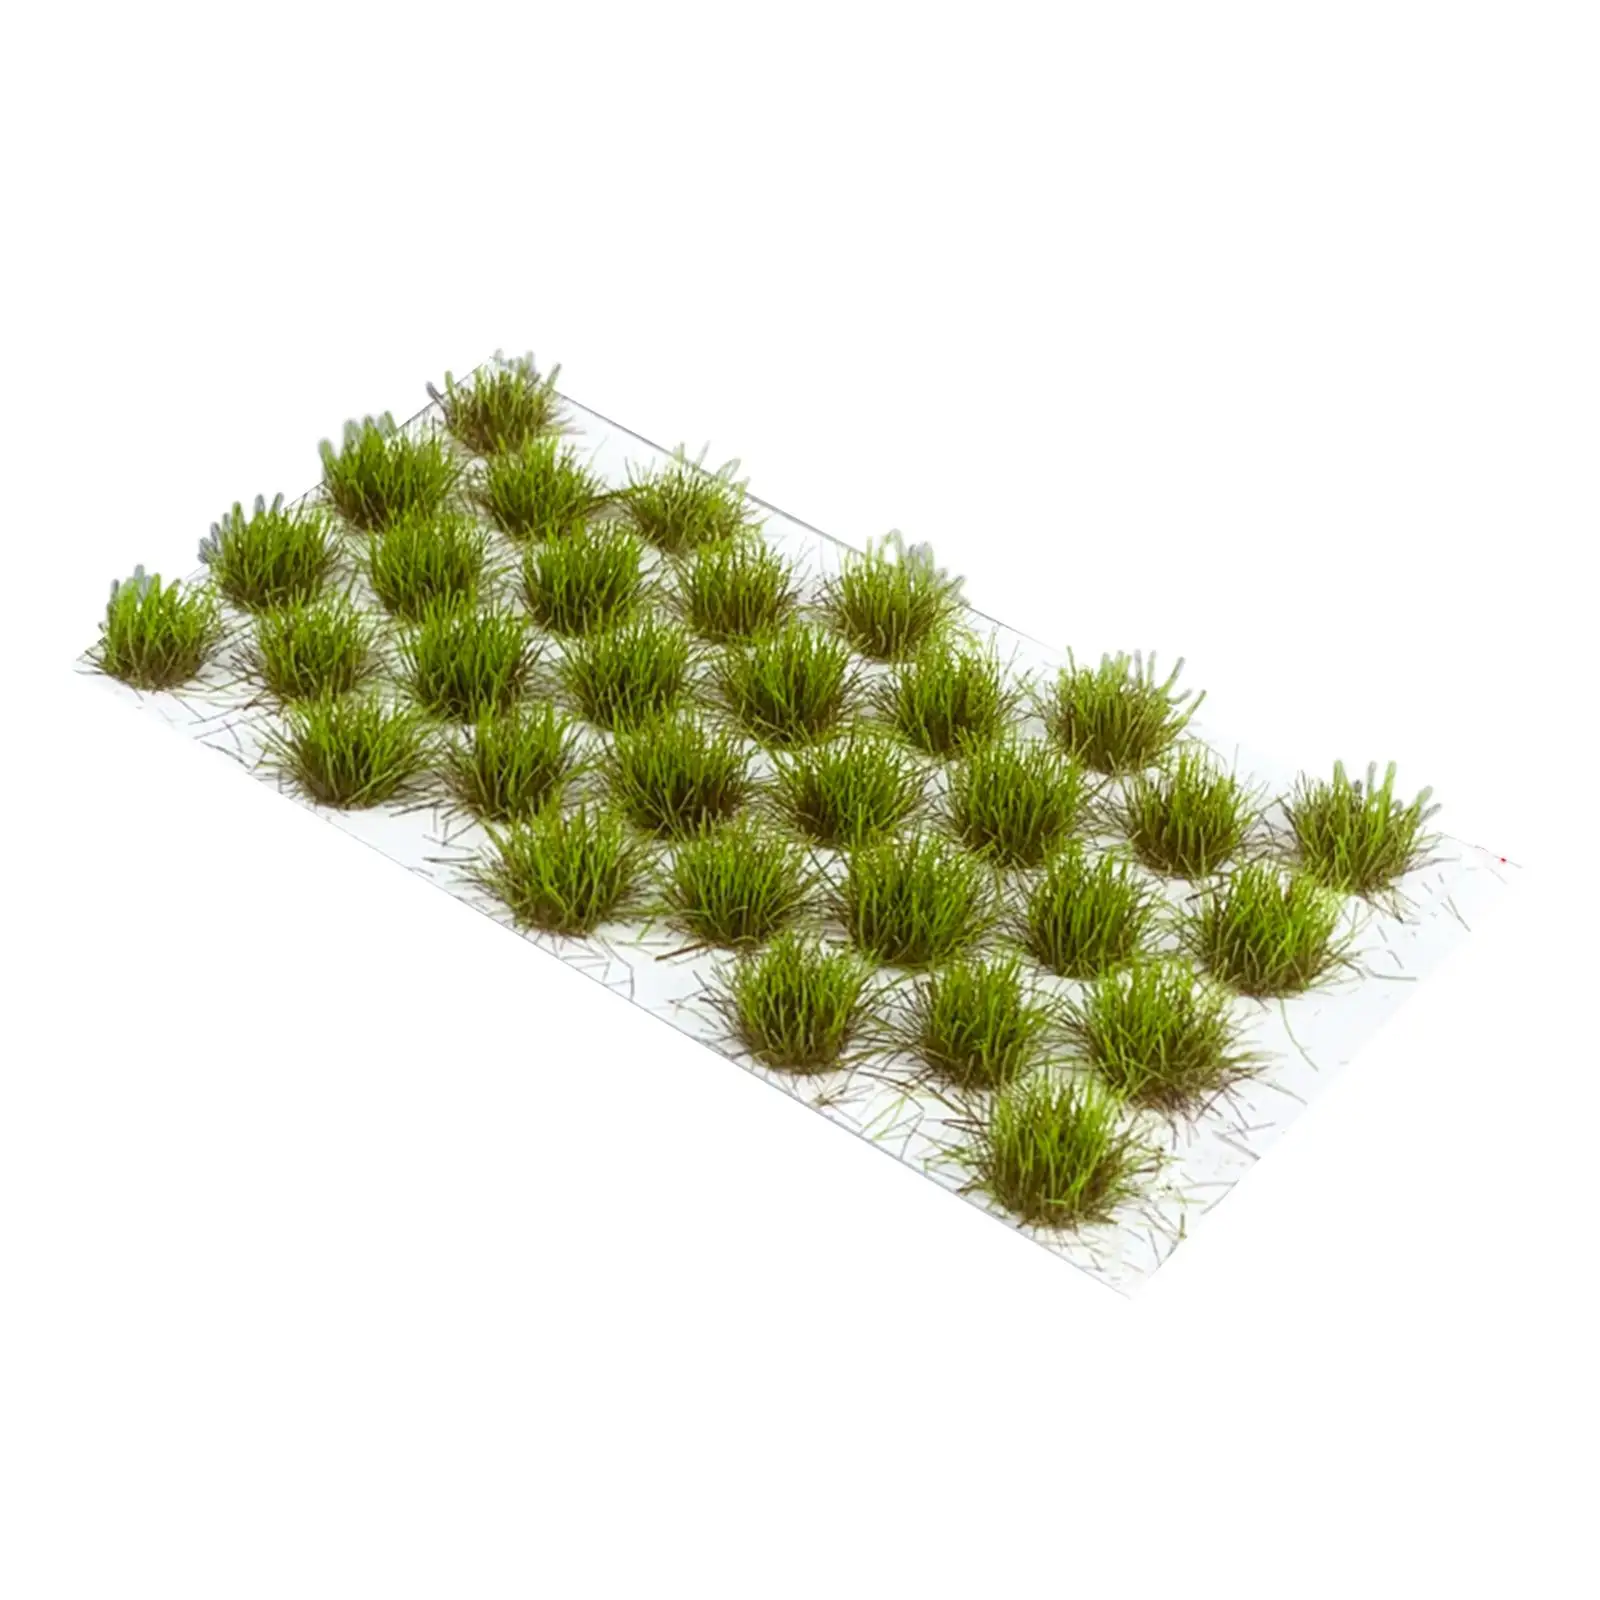 Portable Grass Tufts Grass Tuft Model for Building Model Railroad Scenery